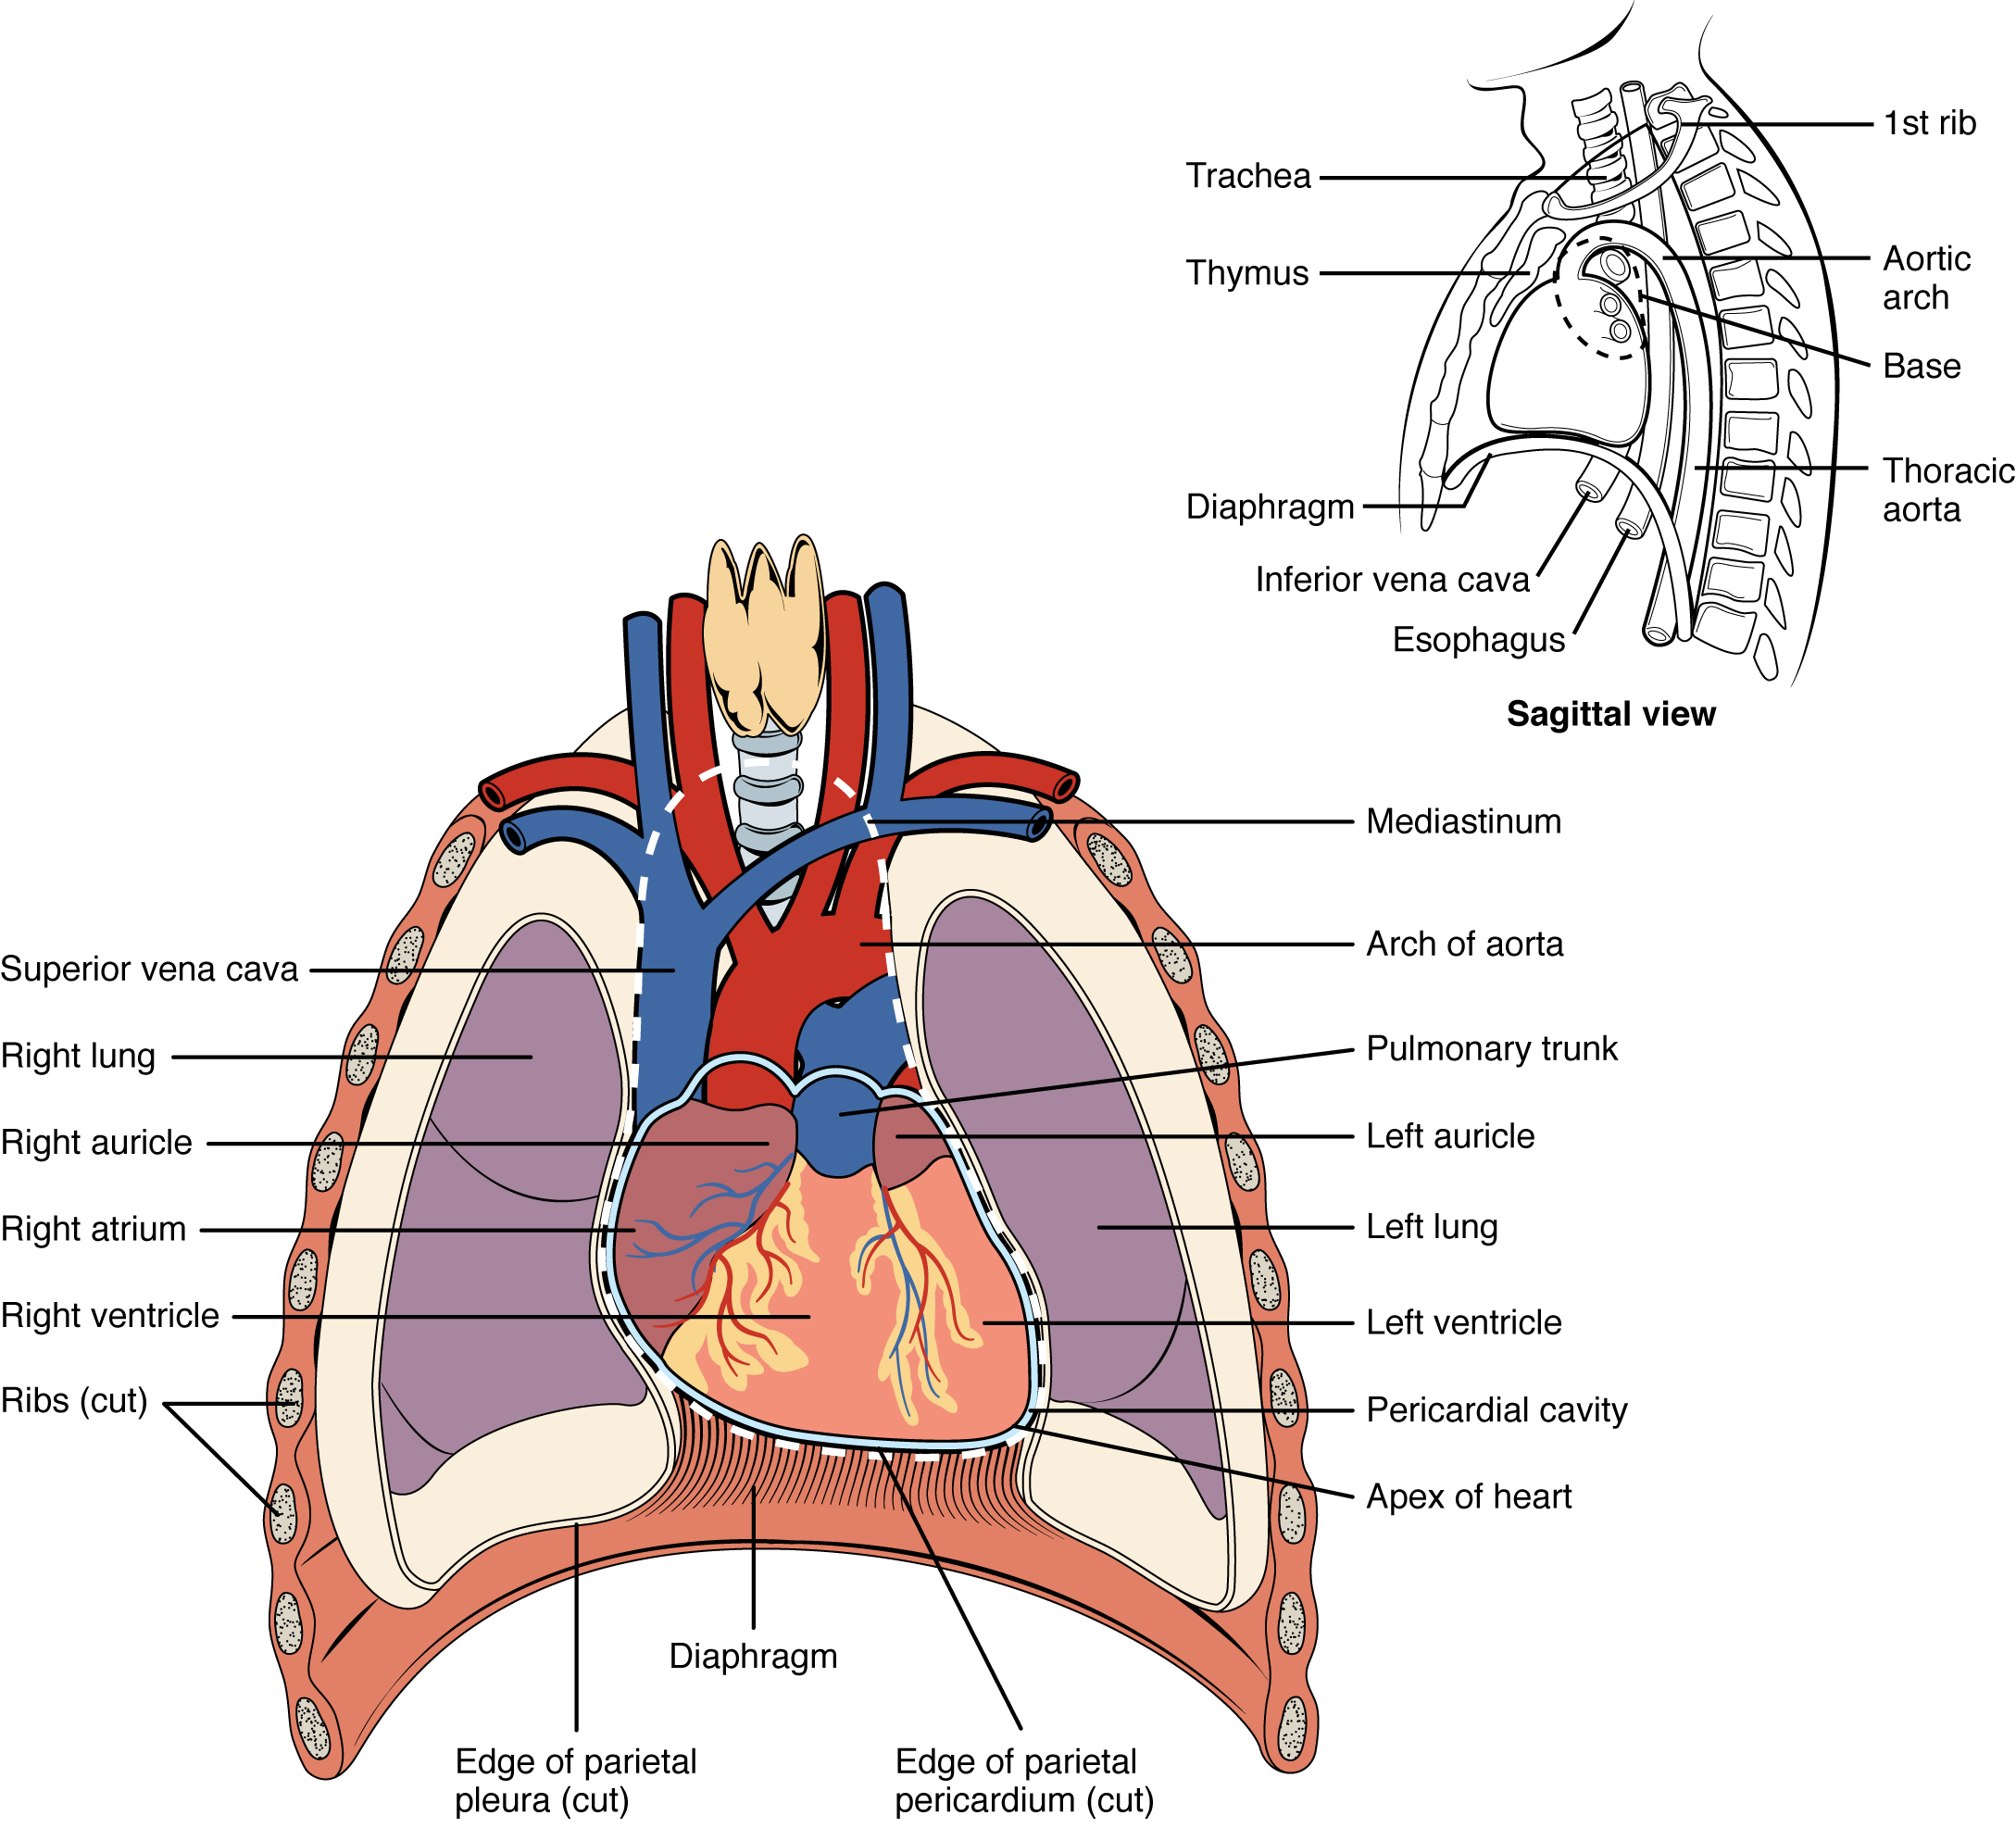 This diagram shows the location of the heart in the thorax (sagittal and anterior views). The sagittal view labels read (from top, clockwise): first rib, aortic arch, thoracic arch, esophagus, inferior vena cava, diaphragm, thymus, trachea. The anterior view labels read (from top, clockwise): mediastinum, arch of aorta, pulmonary trunk, left auricle, left lung, left ventricle, pericardial cavity, apex of heart, edge of parietal pericardium, diaphragm, edge of parietal pleura, ribs, right ventricle, right atrium, right auricle, right lung, superior vena cava.